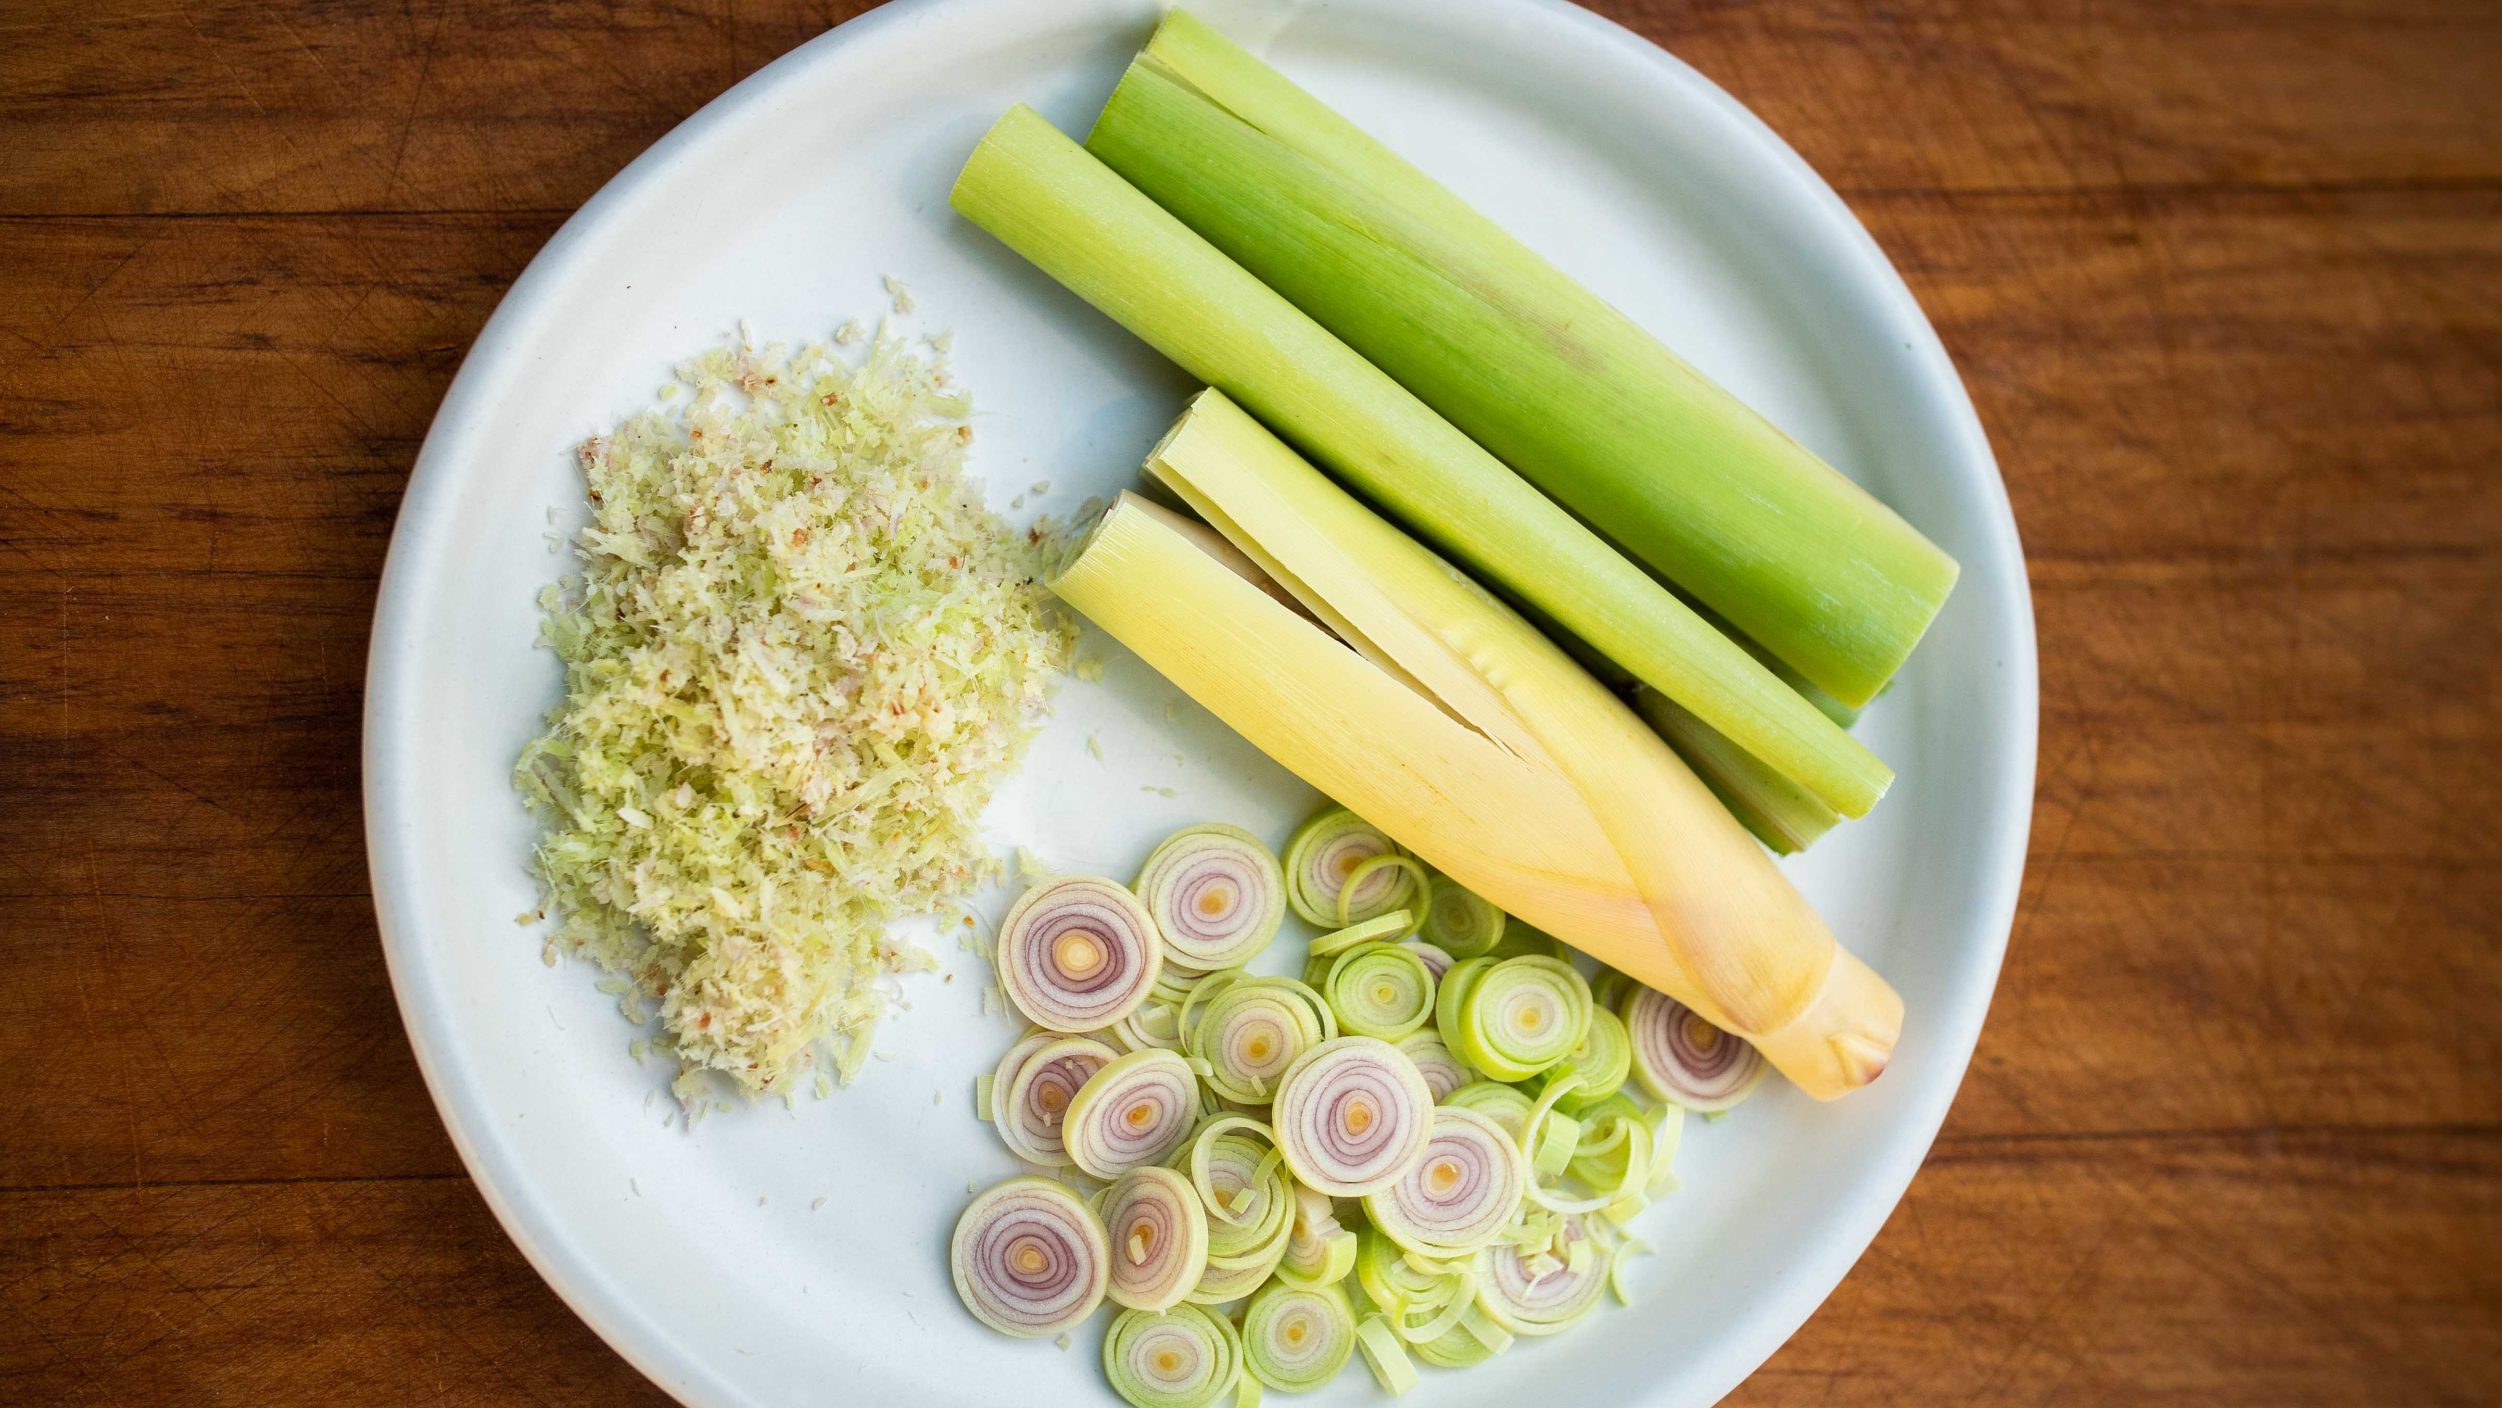 Green stems shown three ways, sliced and grated.